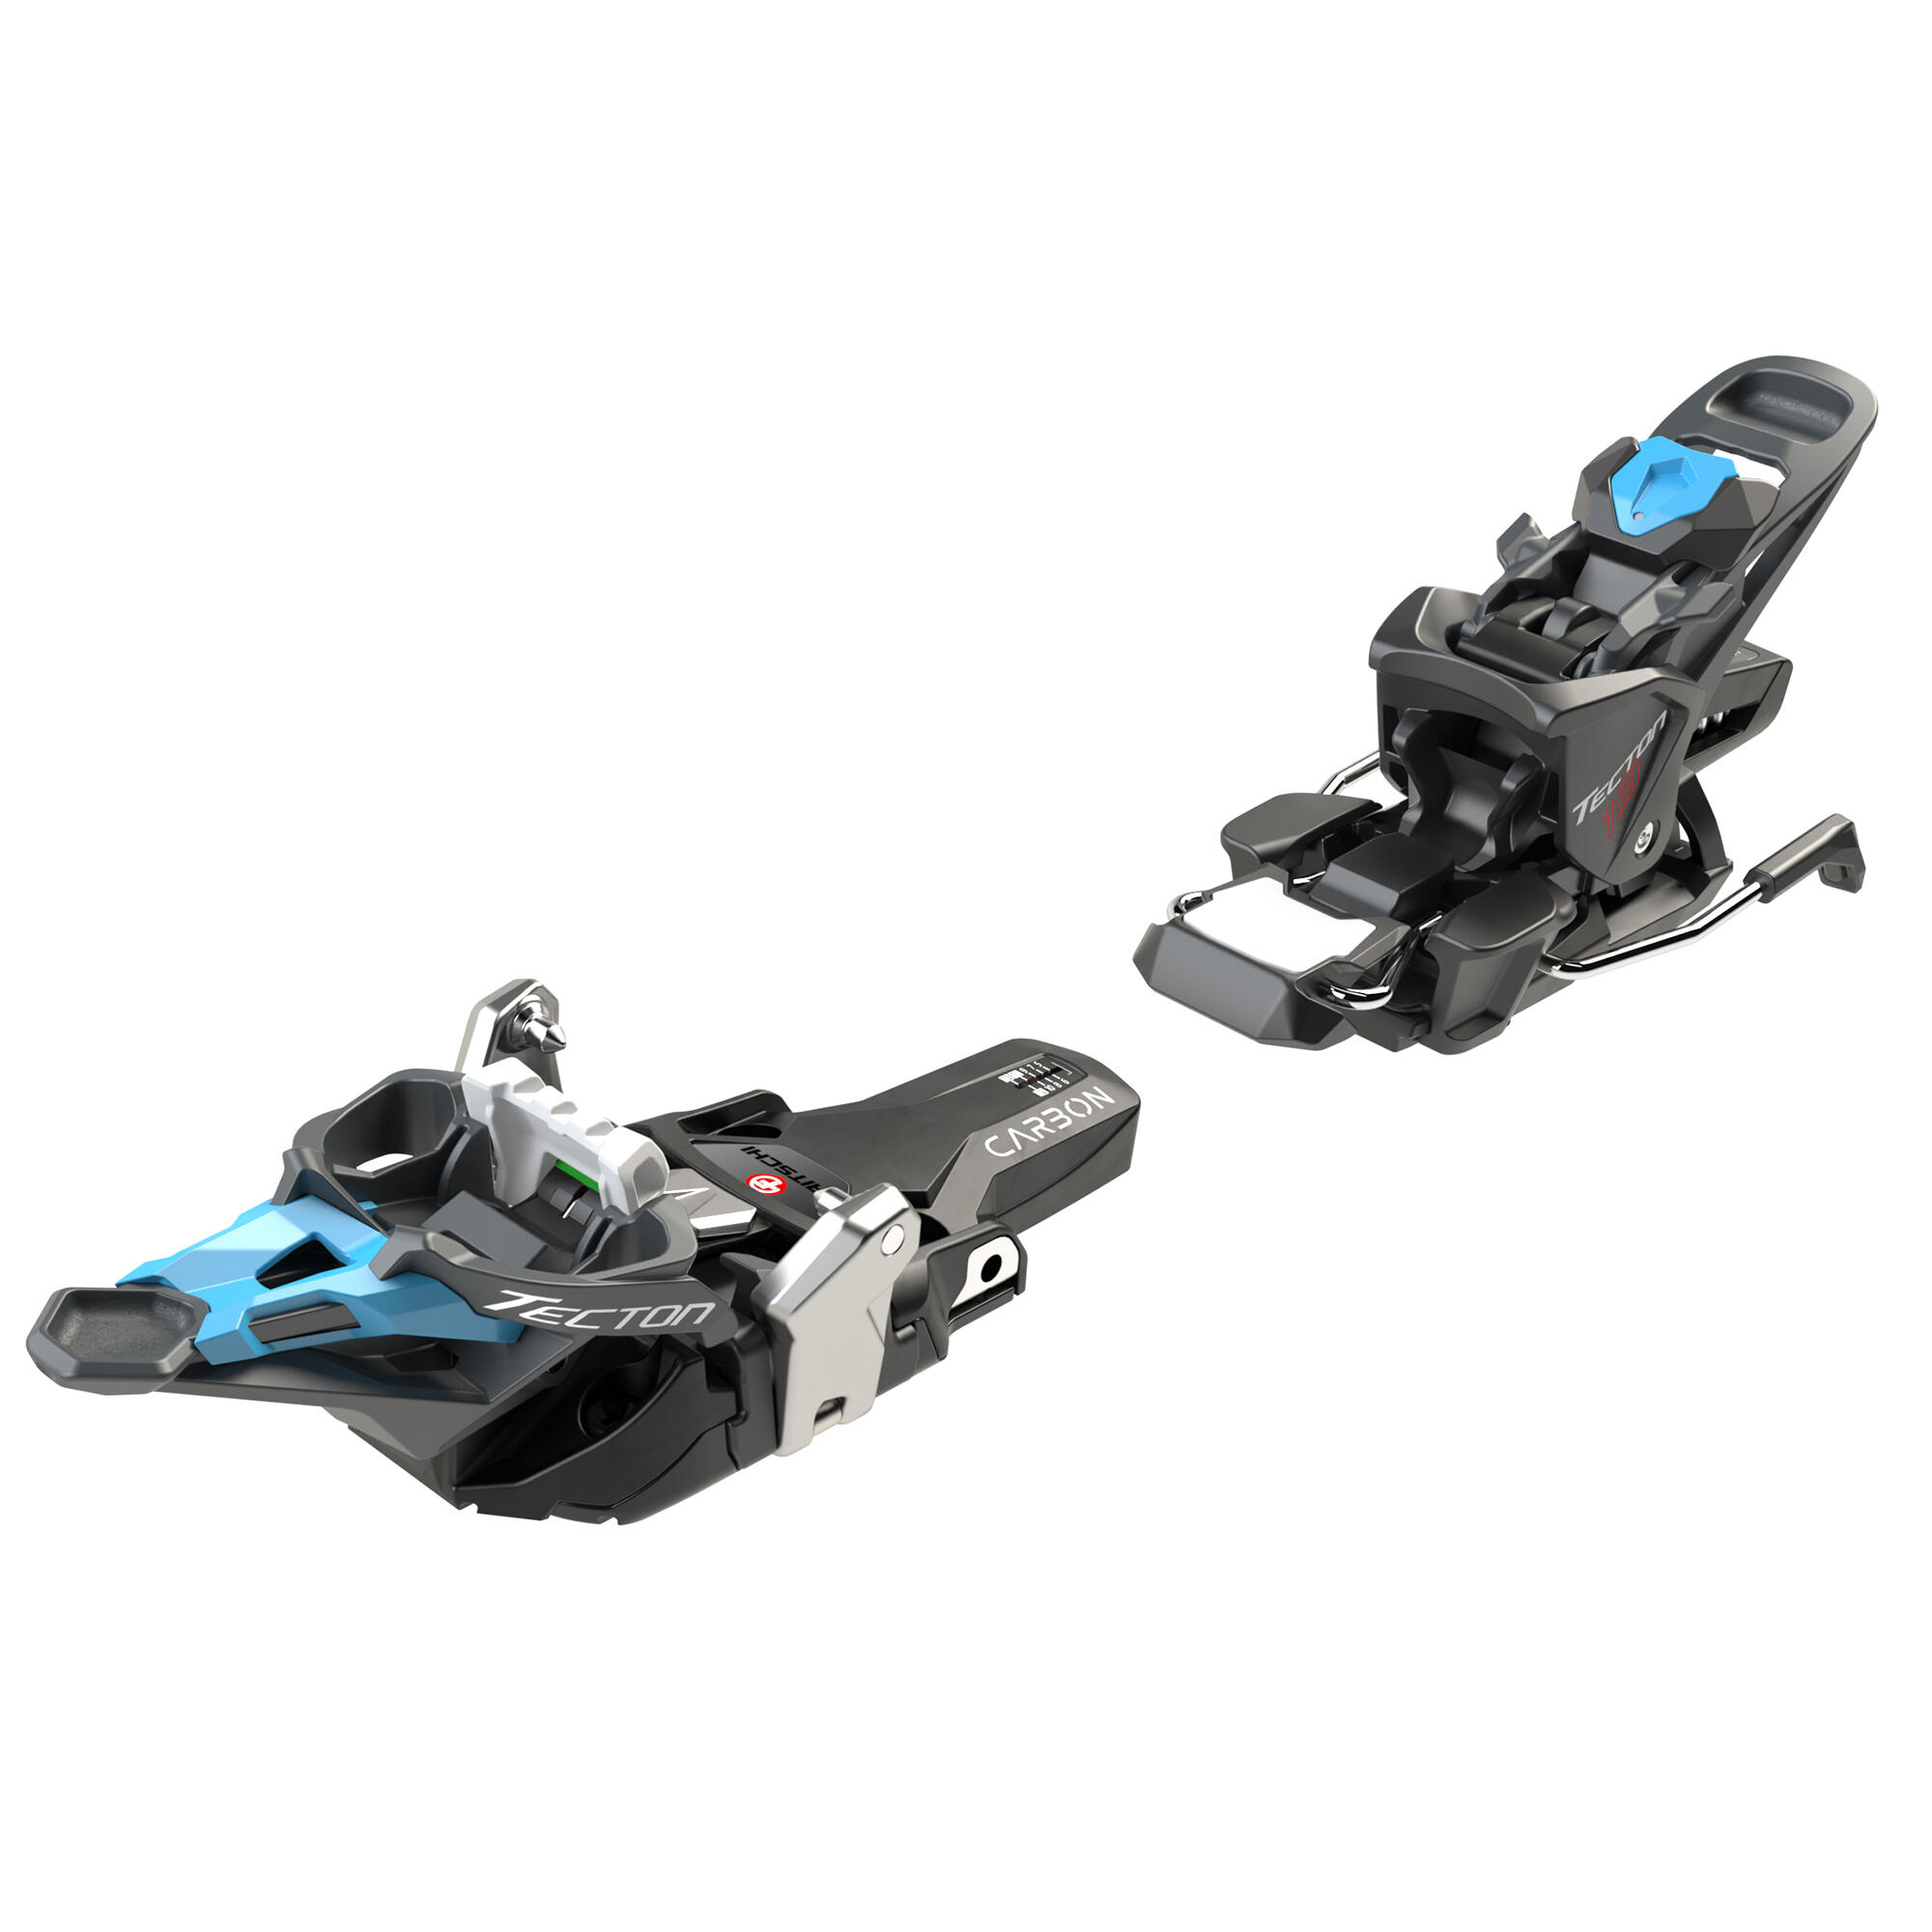 Photos - Other for Winter Sports Cross-country Ski Binding - Fritschi Tecton 13 L120